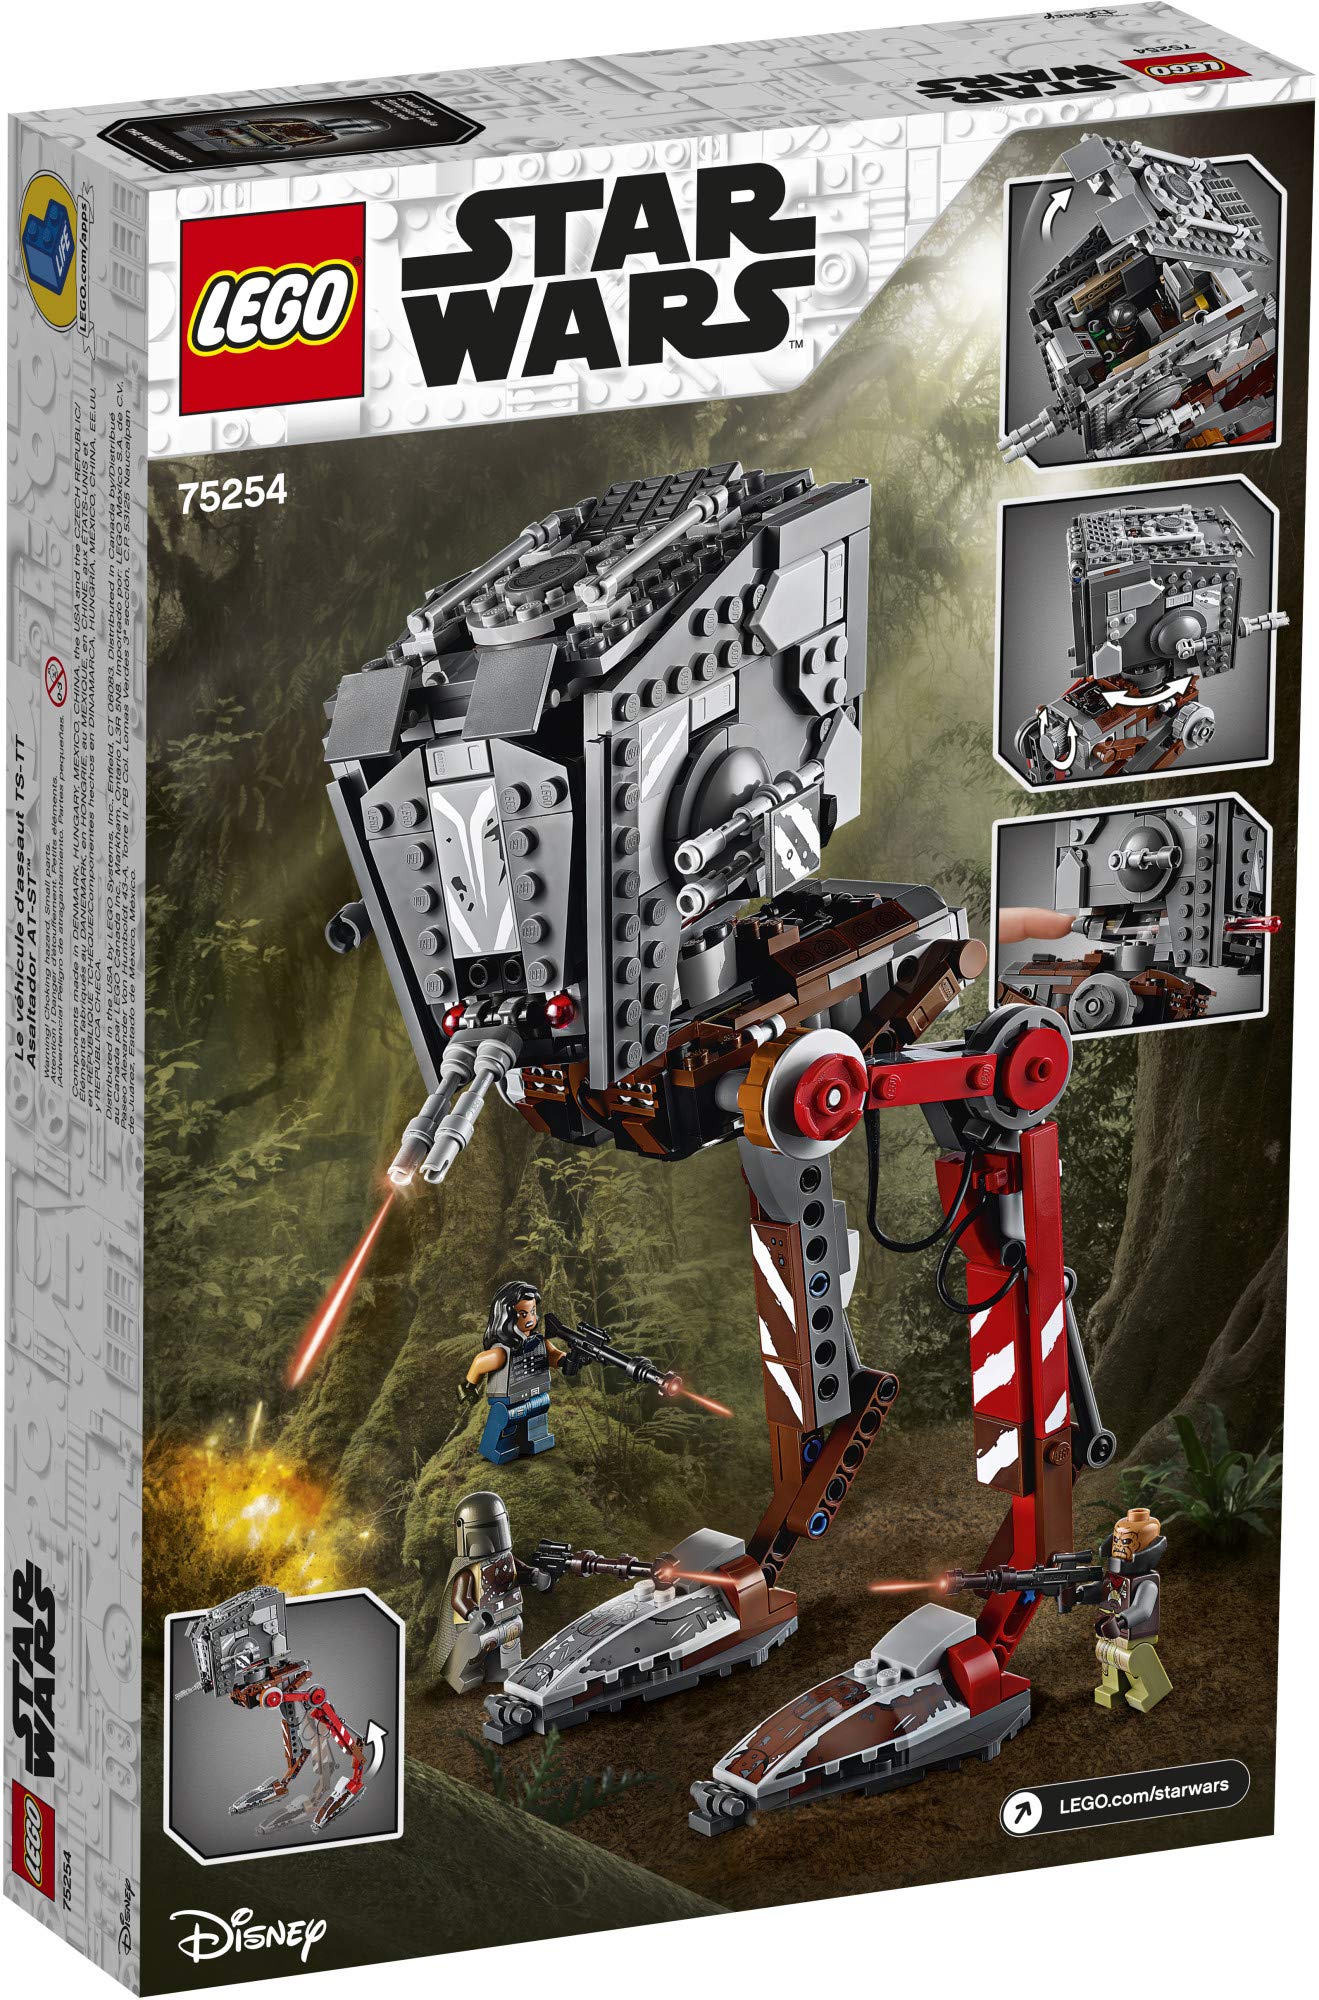 LEGO Star Wars AT-ST Raider 75254 The Mandalorian Collectible All Terrain Scout Transport Walker Posable Building Model, New 2019 (540 Pieces)